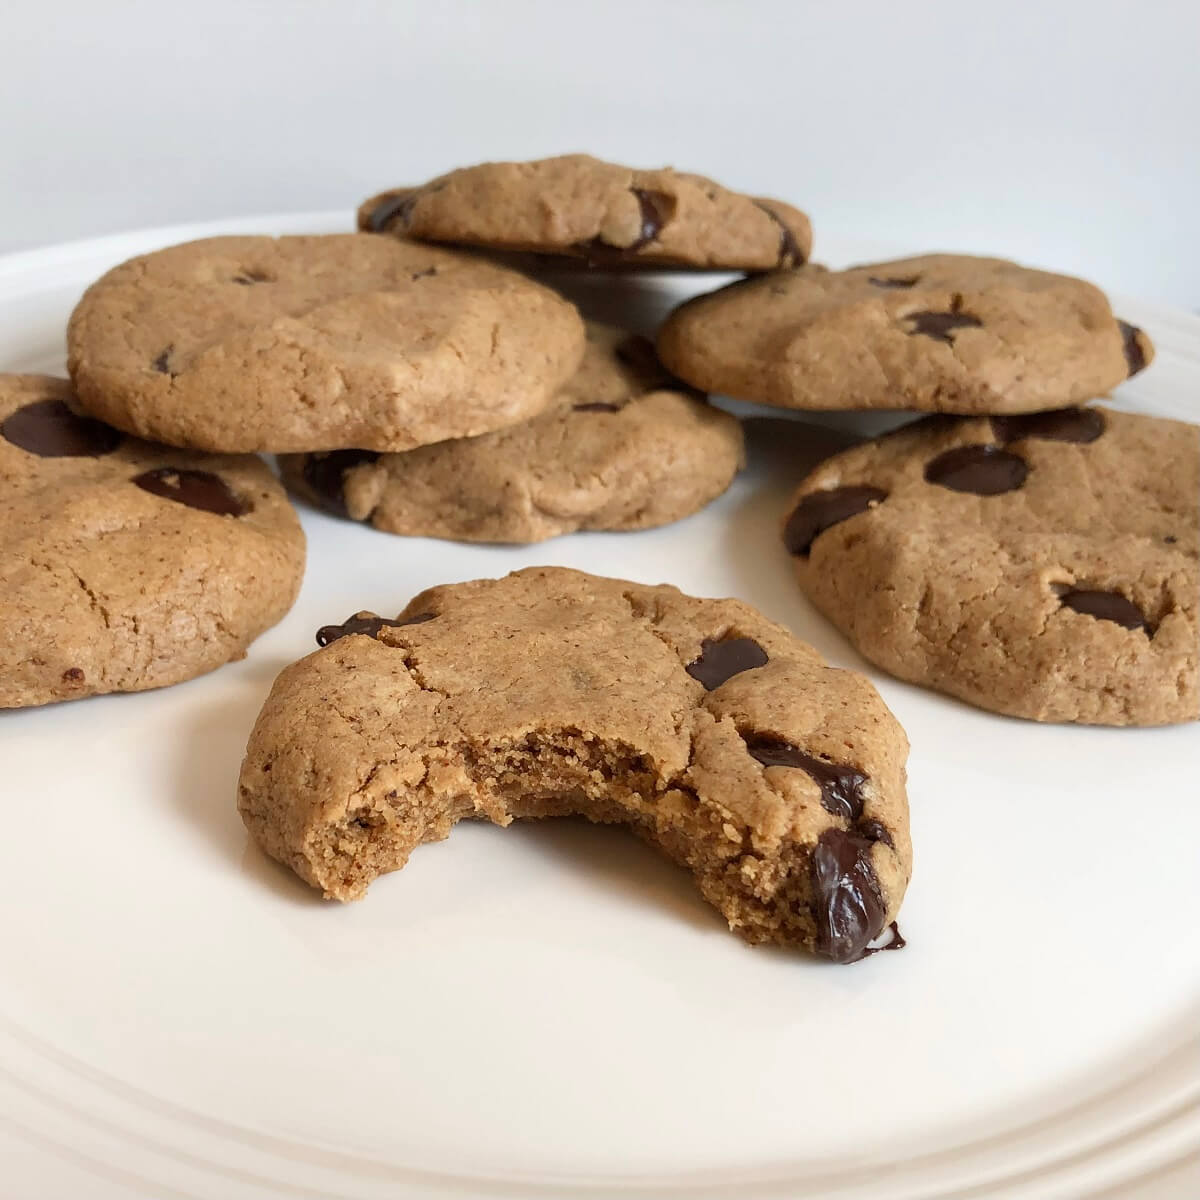 Chocolate chip cookies piled on a white plate with a bite missing from one.